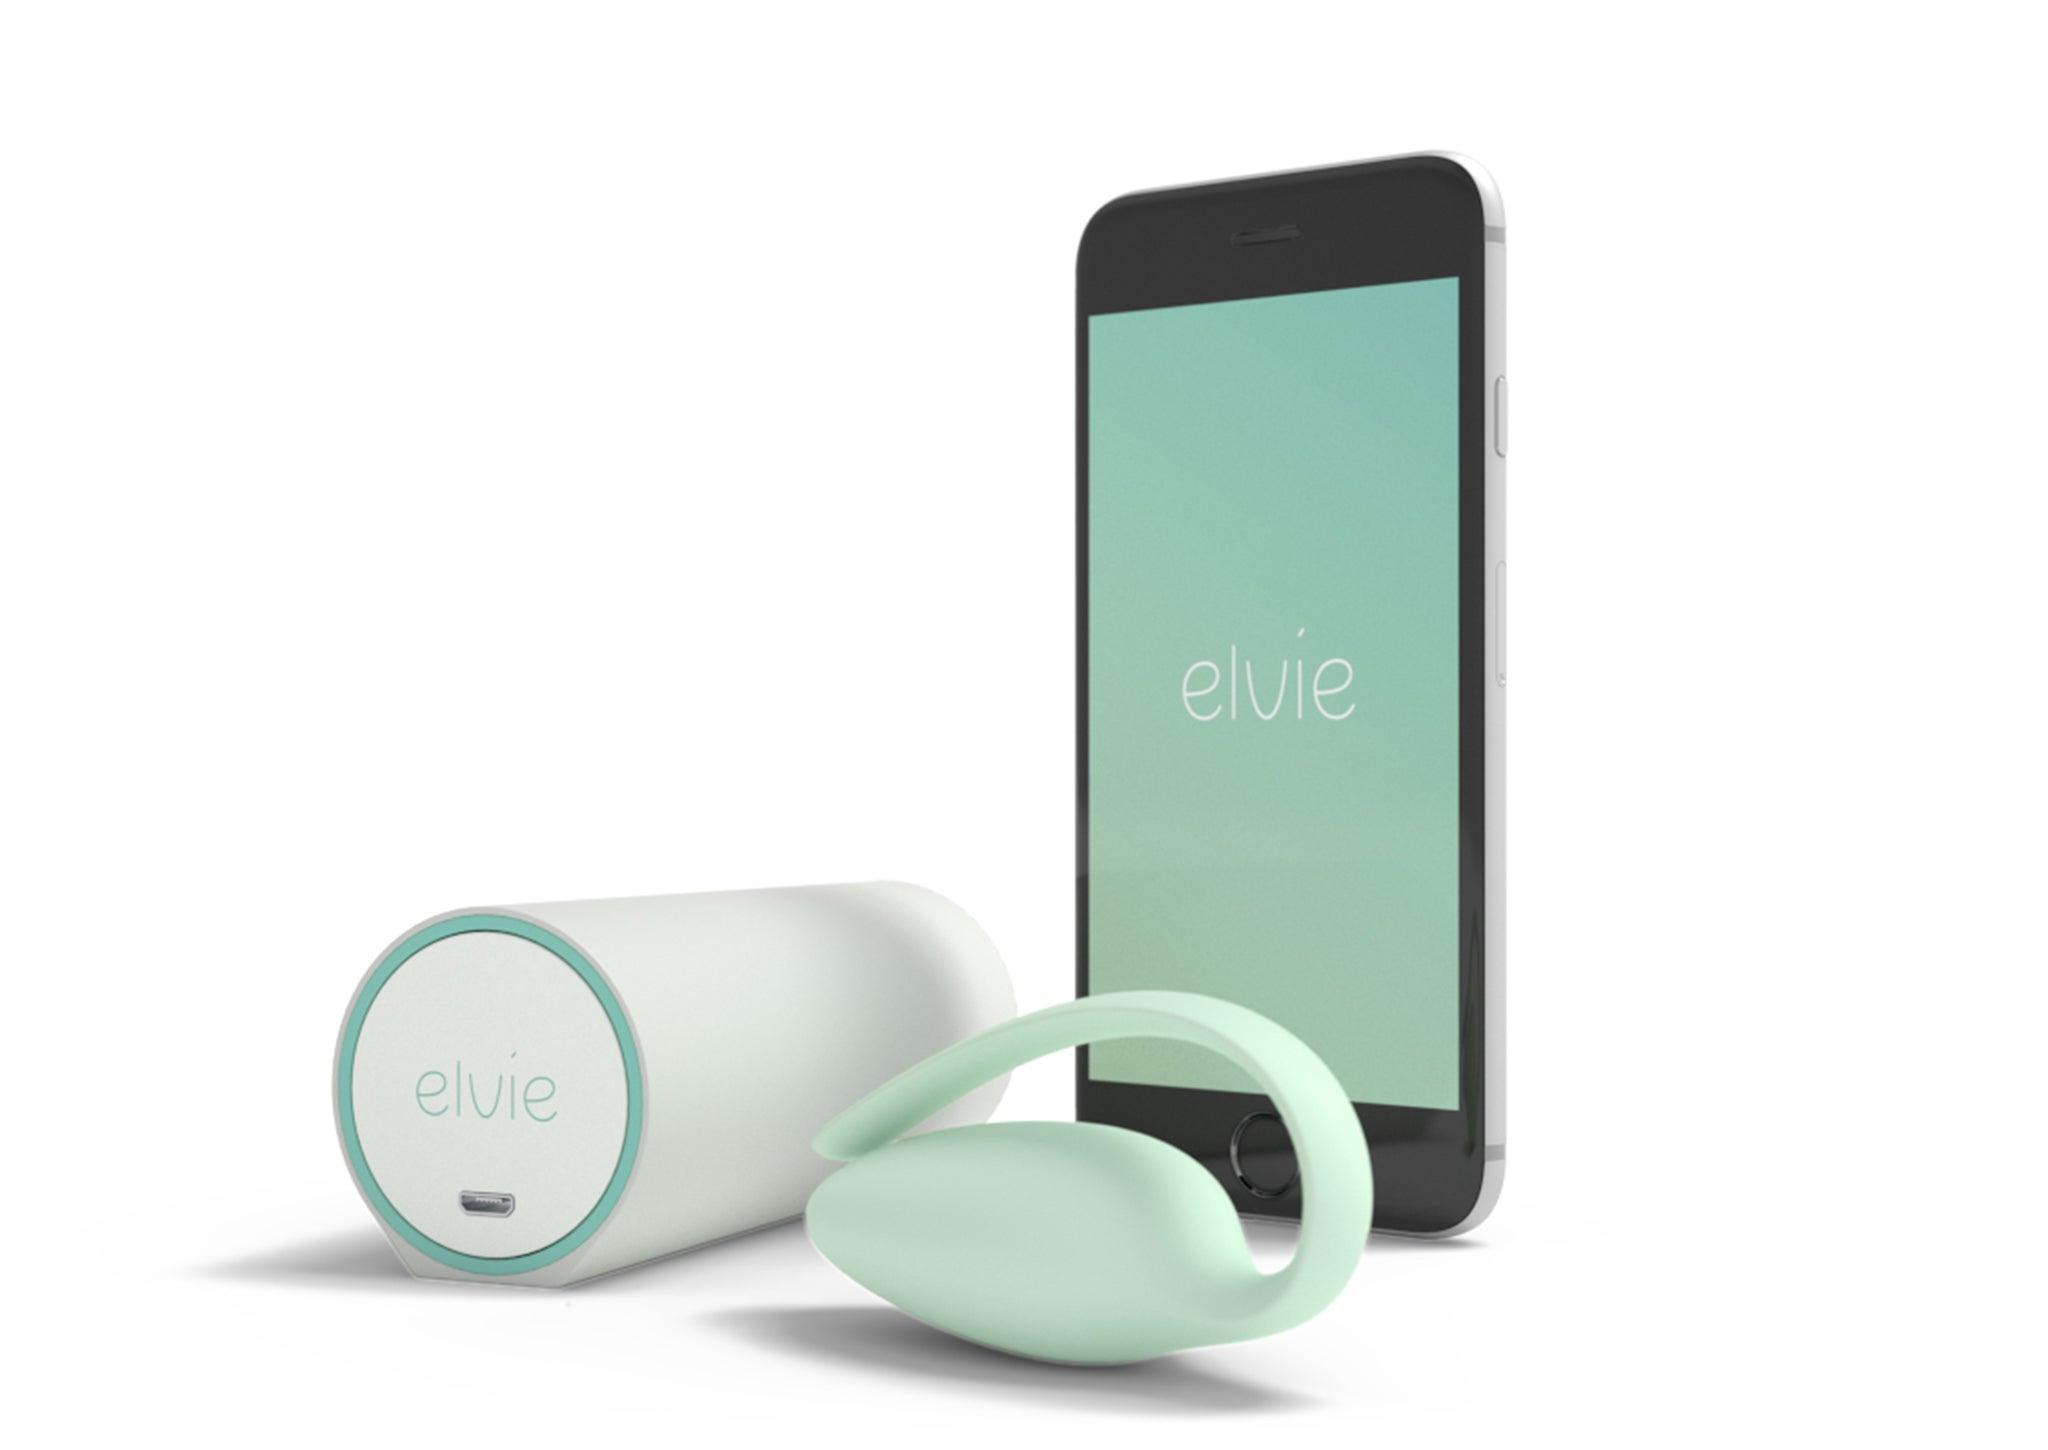 " If you’ve ever wanted to check the muscles in your downstairs are working properly, look no further. This £149 device, which you insert into your vagina, can be connected to a digital app that tells you how good your pelvic floor muscles are. Yummy."